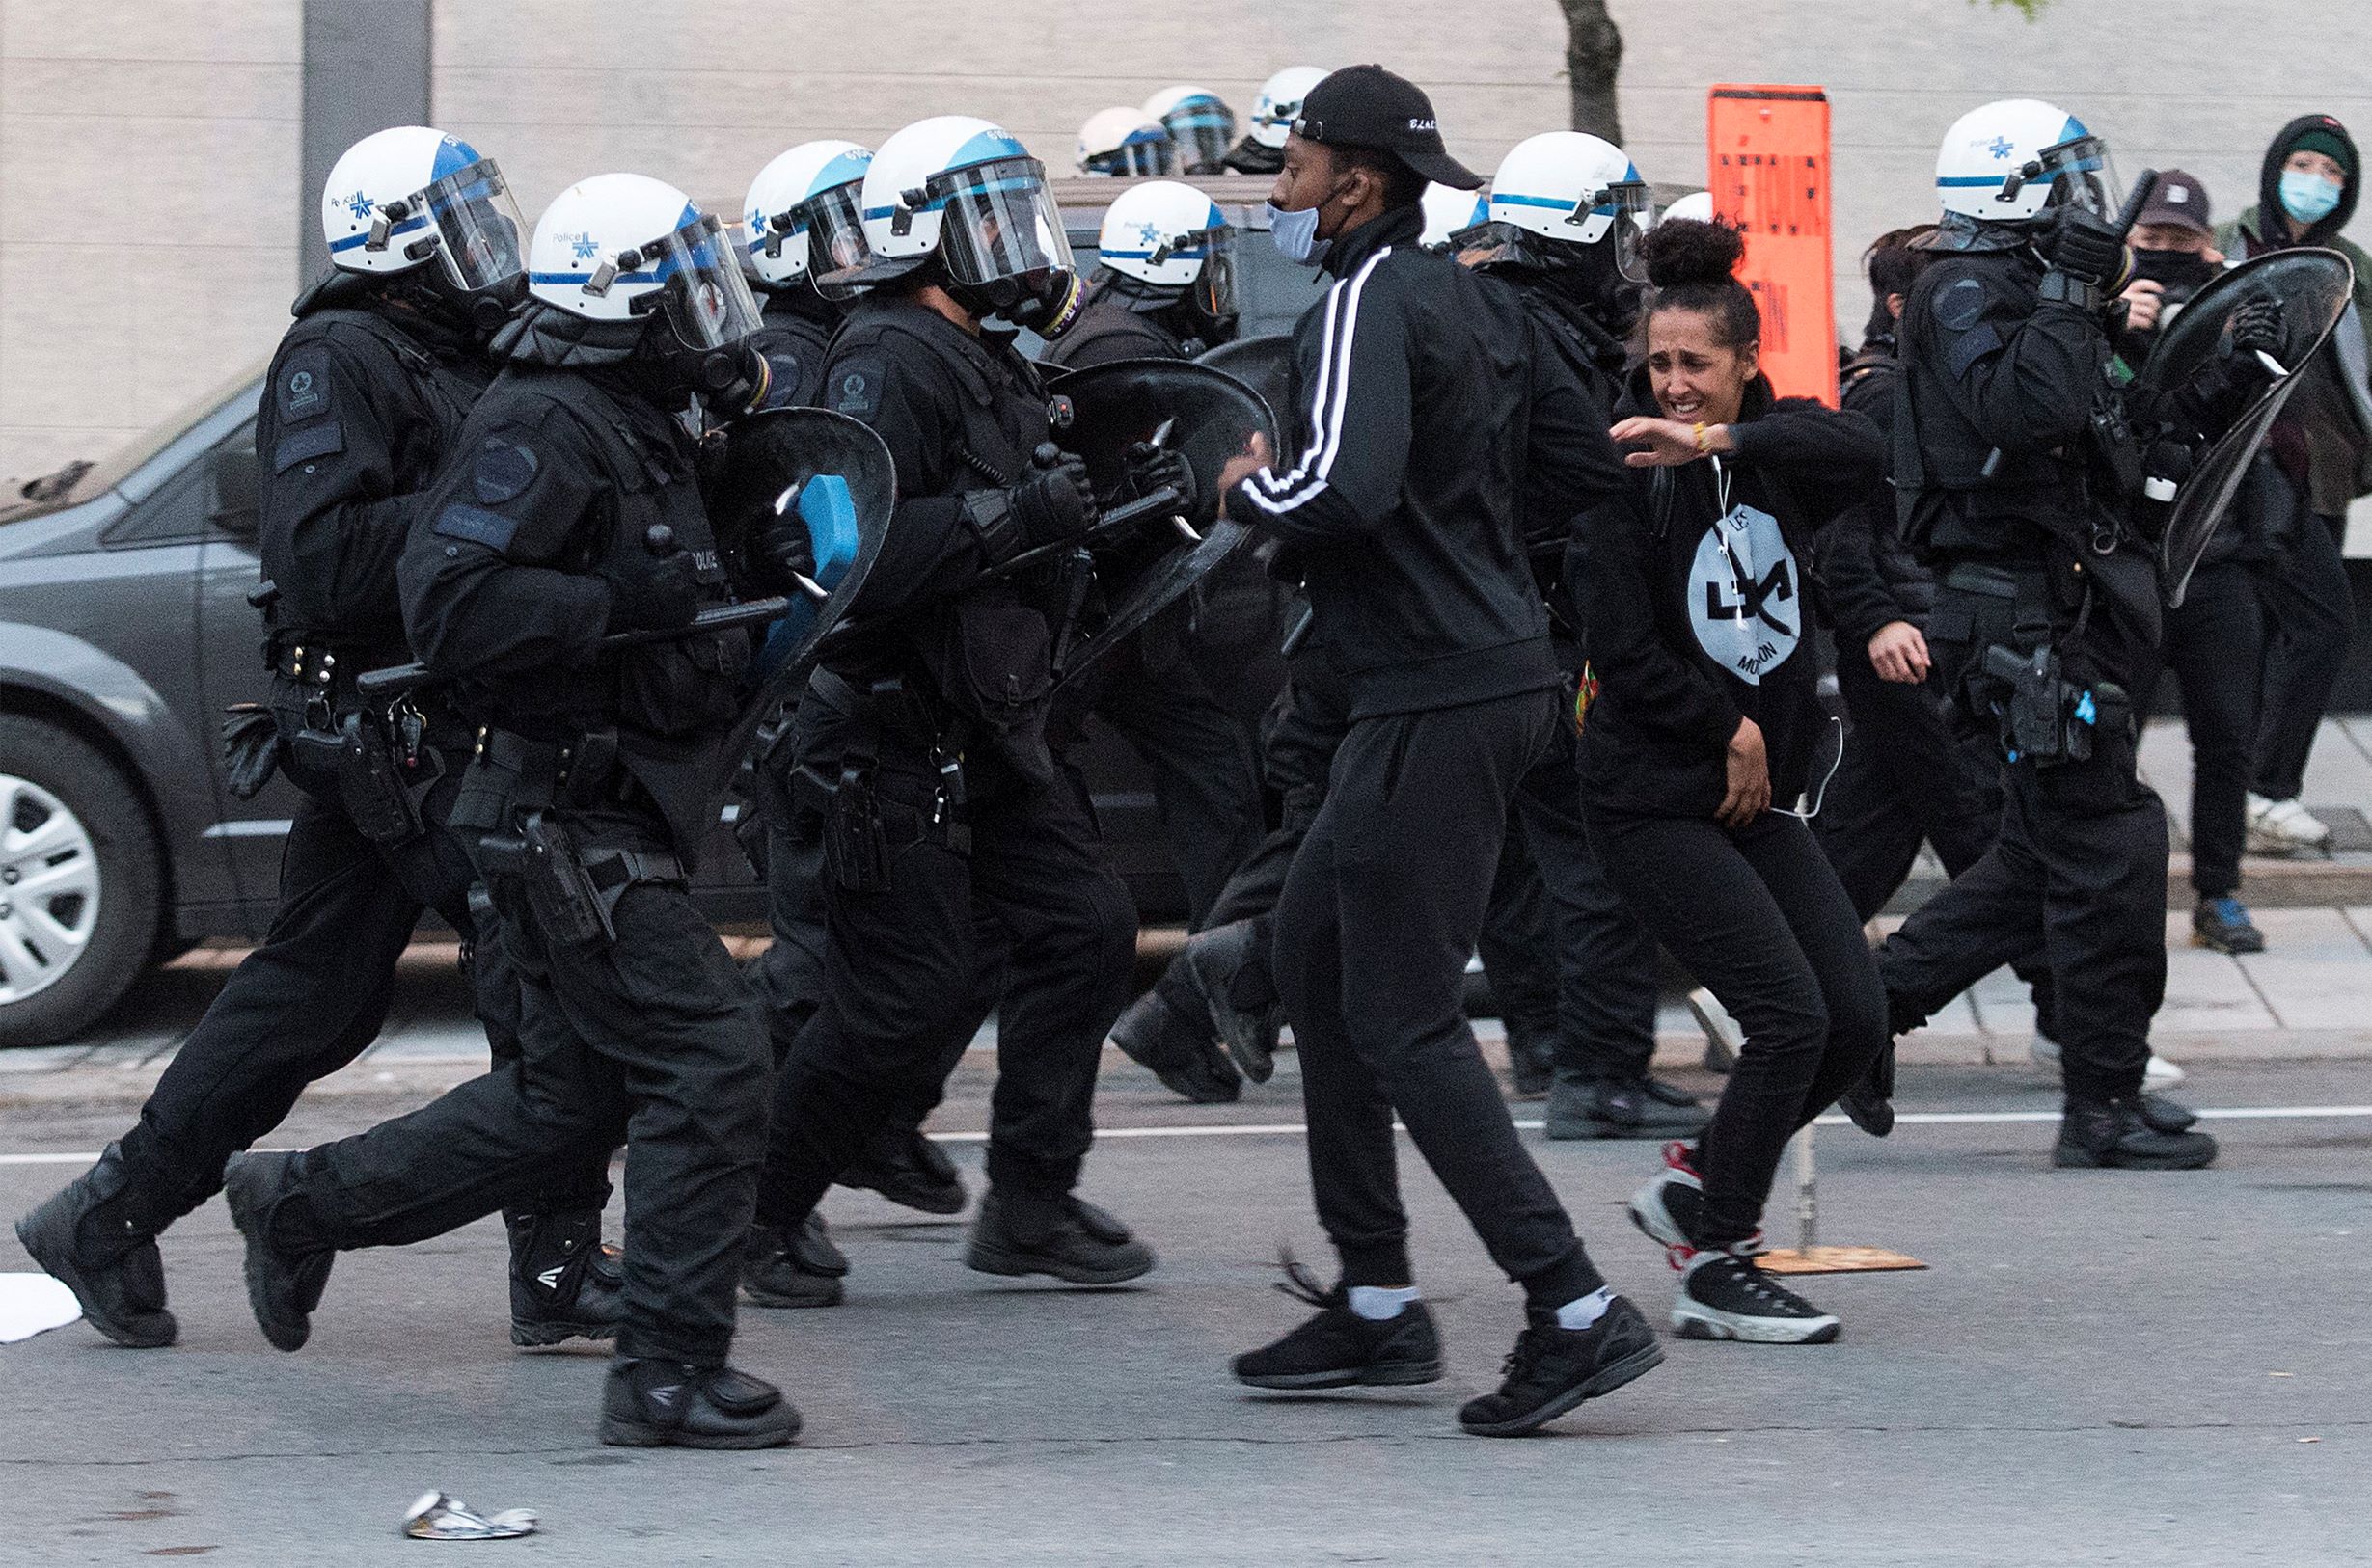 police_push_back_protesters_during_a_demonstration_calling_for_justice_in_the_death_of_george_floyd_and_victims_of_police_brutality._montreal_may_31_2020.the_canadian_press-_graham_hughes.jpg